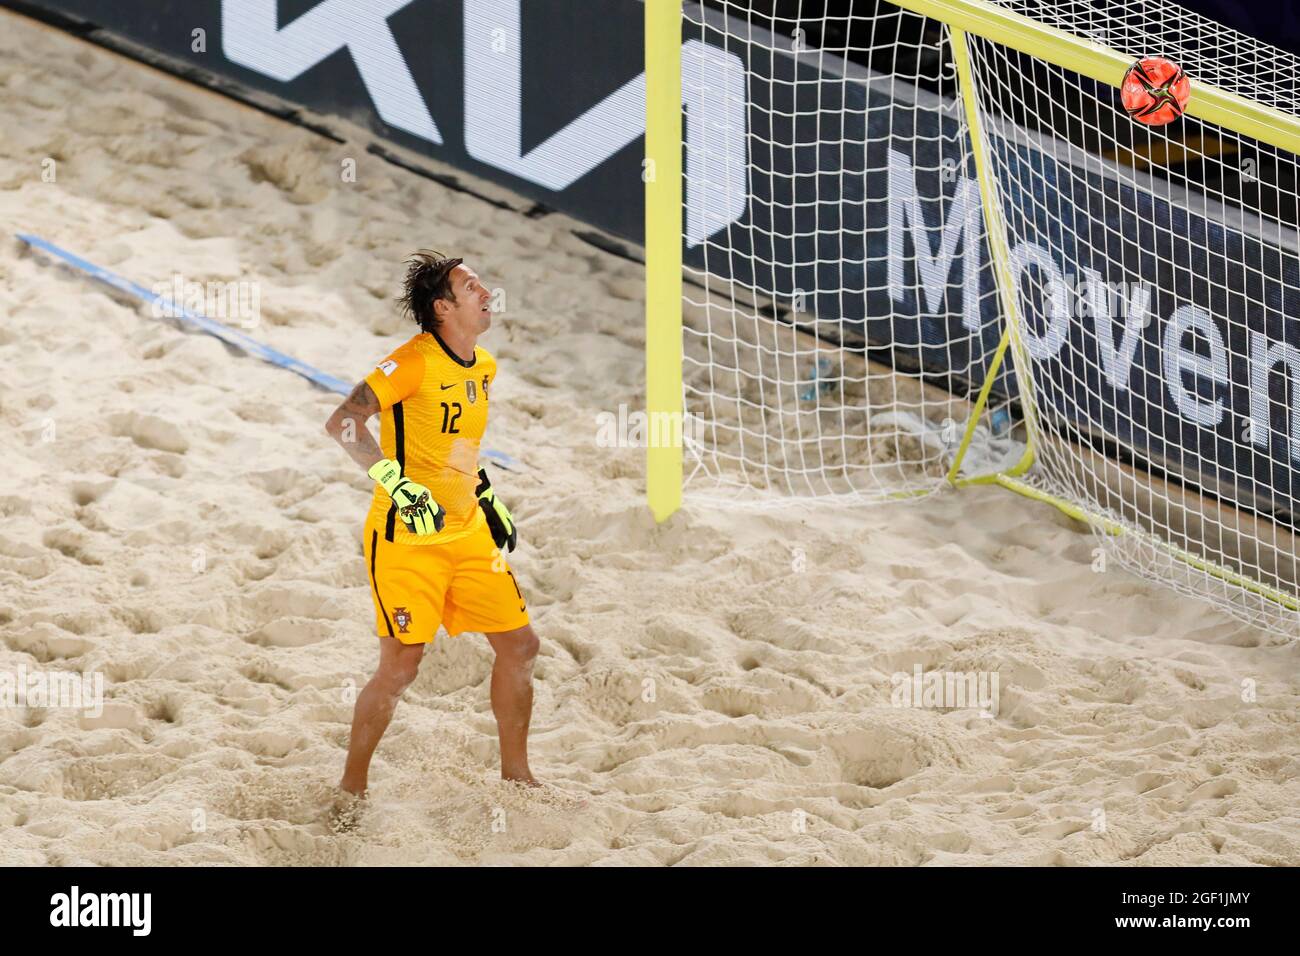 Moscow, Russia. 22nd August 2021; Luzhniki Stadium, Moscow, Russia: FIFA World Cup Beach Football tournament; Elinton Andrade from Portugal watches the shot hit his crossbar during the match between Portugal and Senegal, in the 2nd round of Group D Credit: Action Plus Sports Images/Alamy Live News Stock Photo